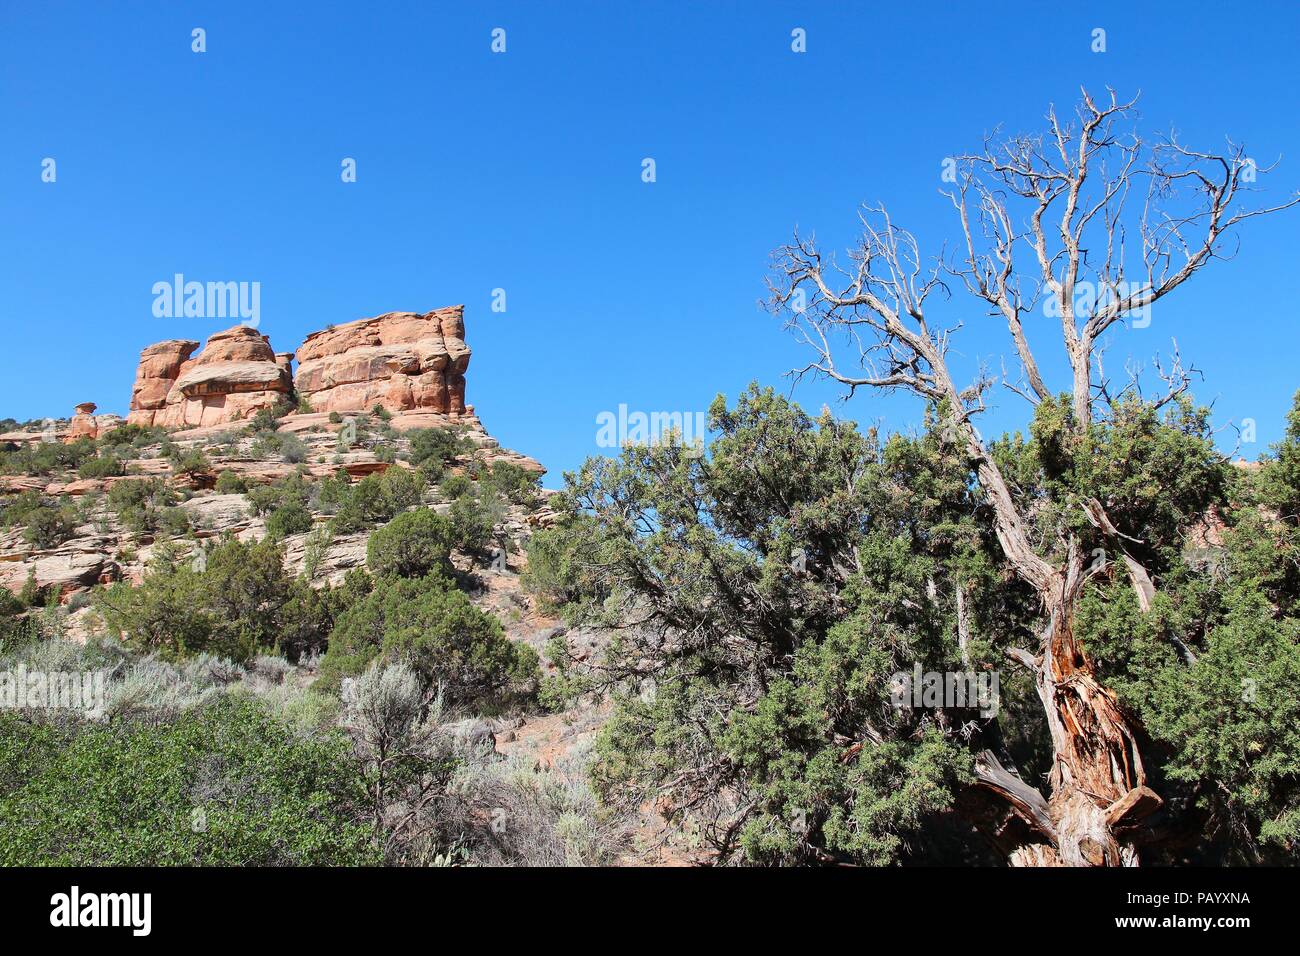 Colorado National Monument in the United States. Part of National Park Service. Pinyon Pine tree (Pinus edulis) next to Monument Canyon rim trail. Stock Photo